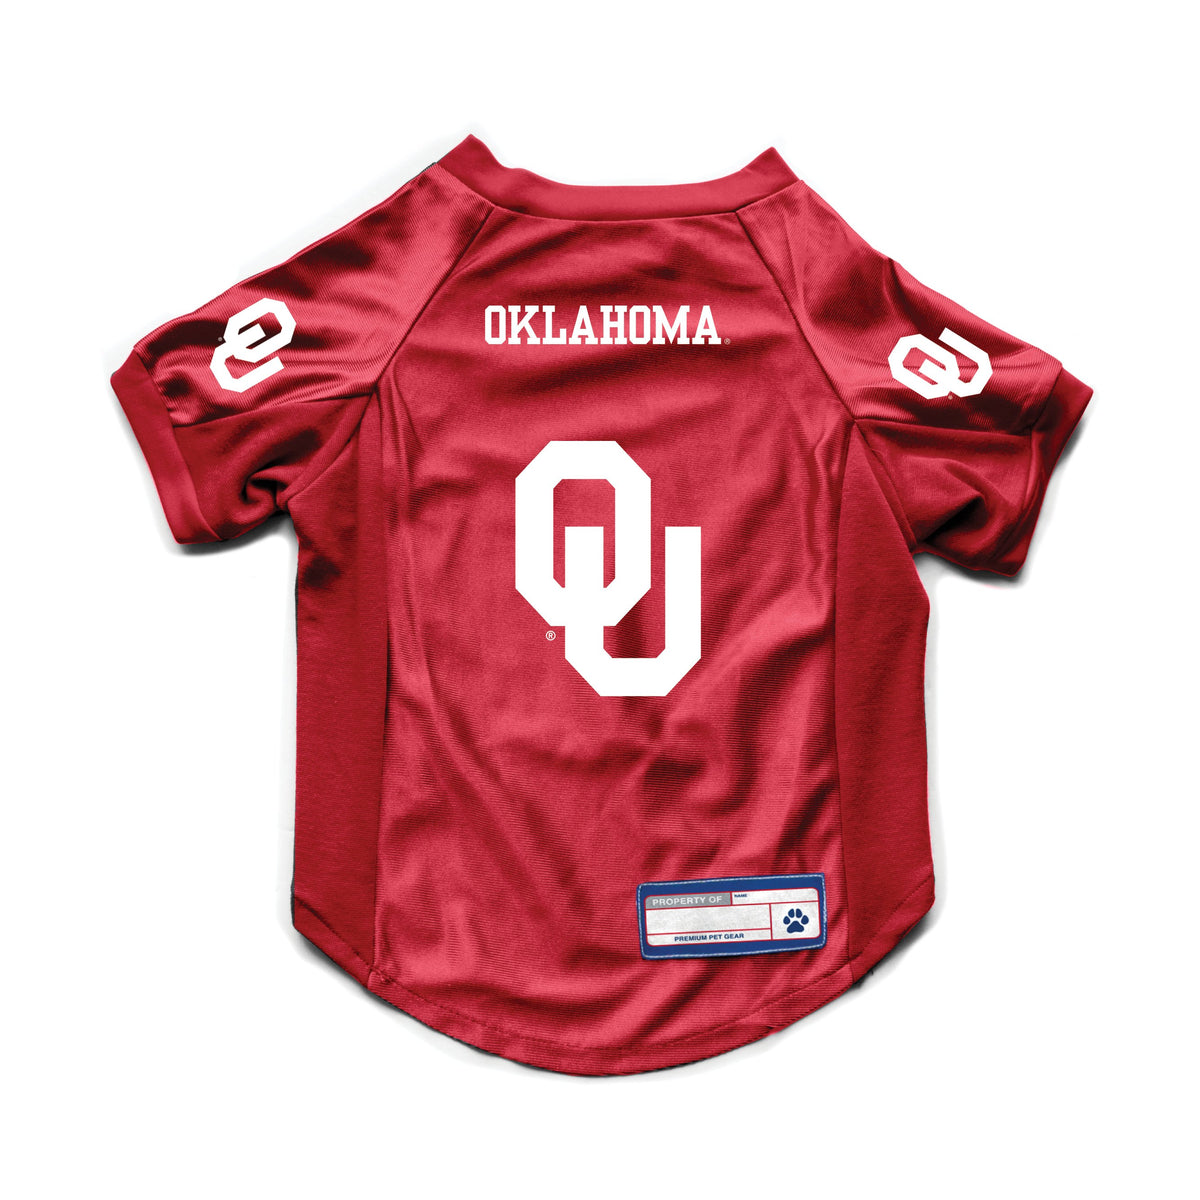 OK Sooners Stretch Jersey - 3 Red Rovers